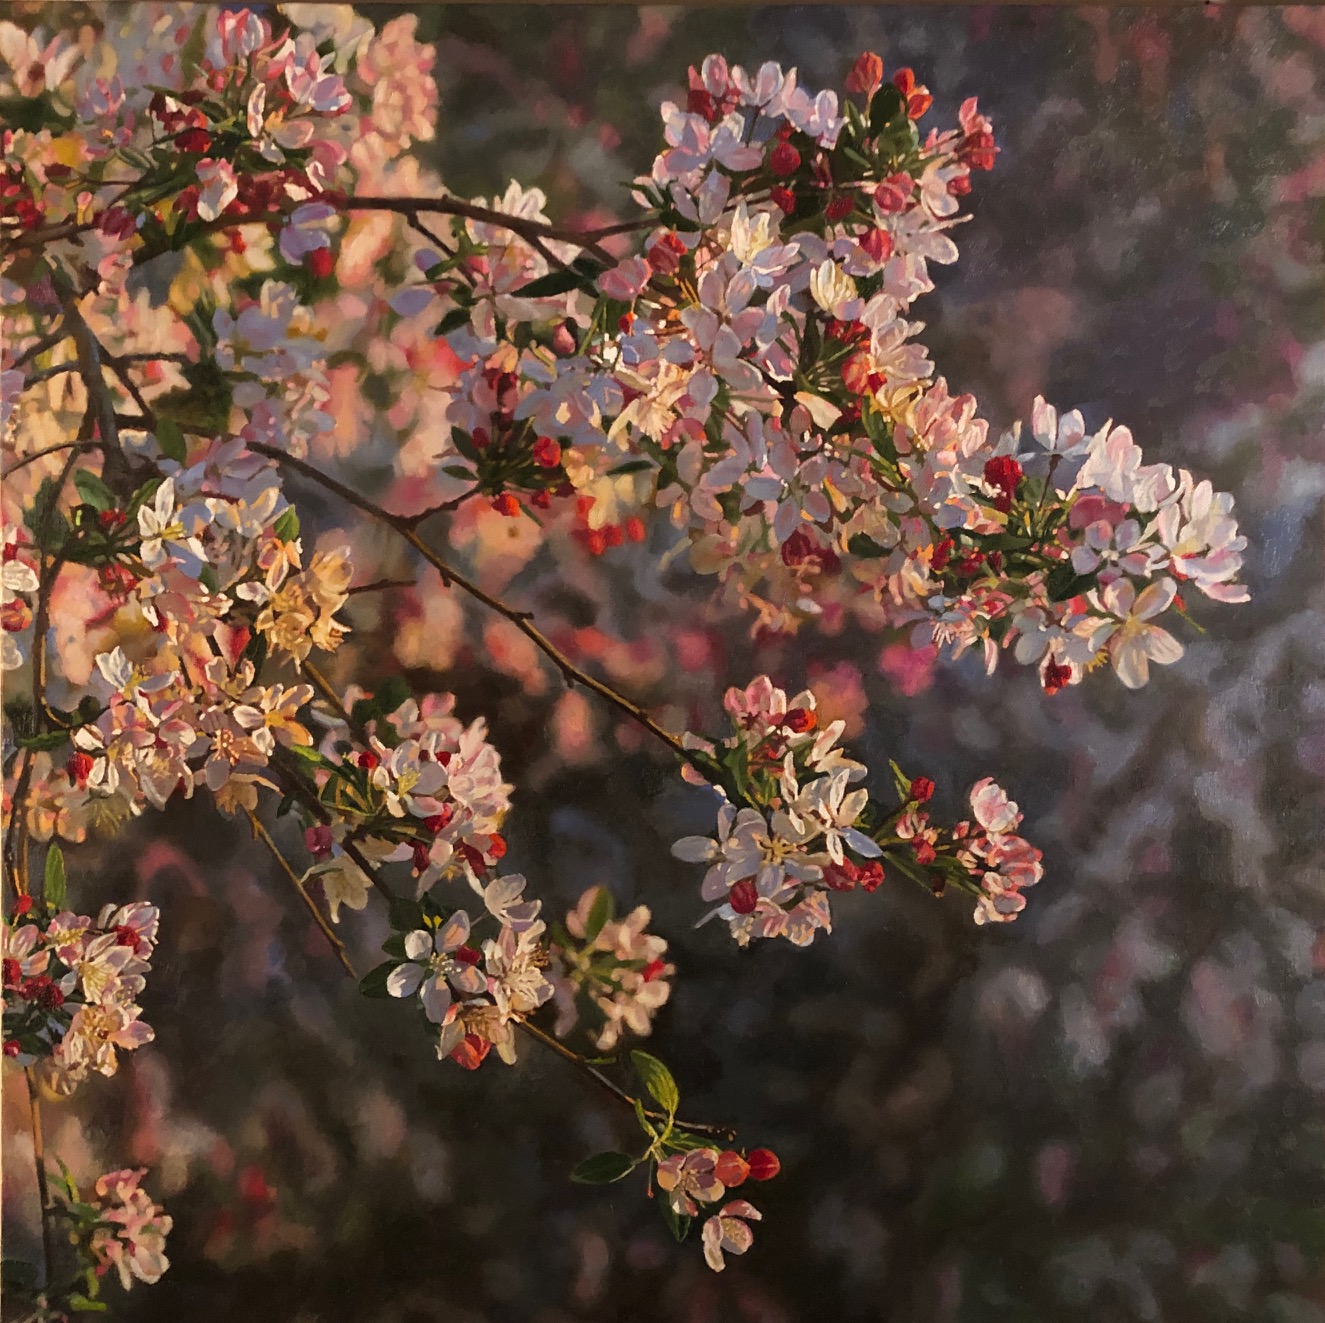 Crabapple Blossoms, 2019, oil on canvas, 30"x30”